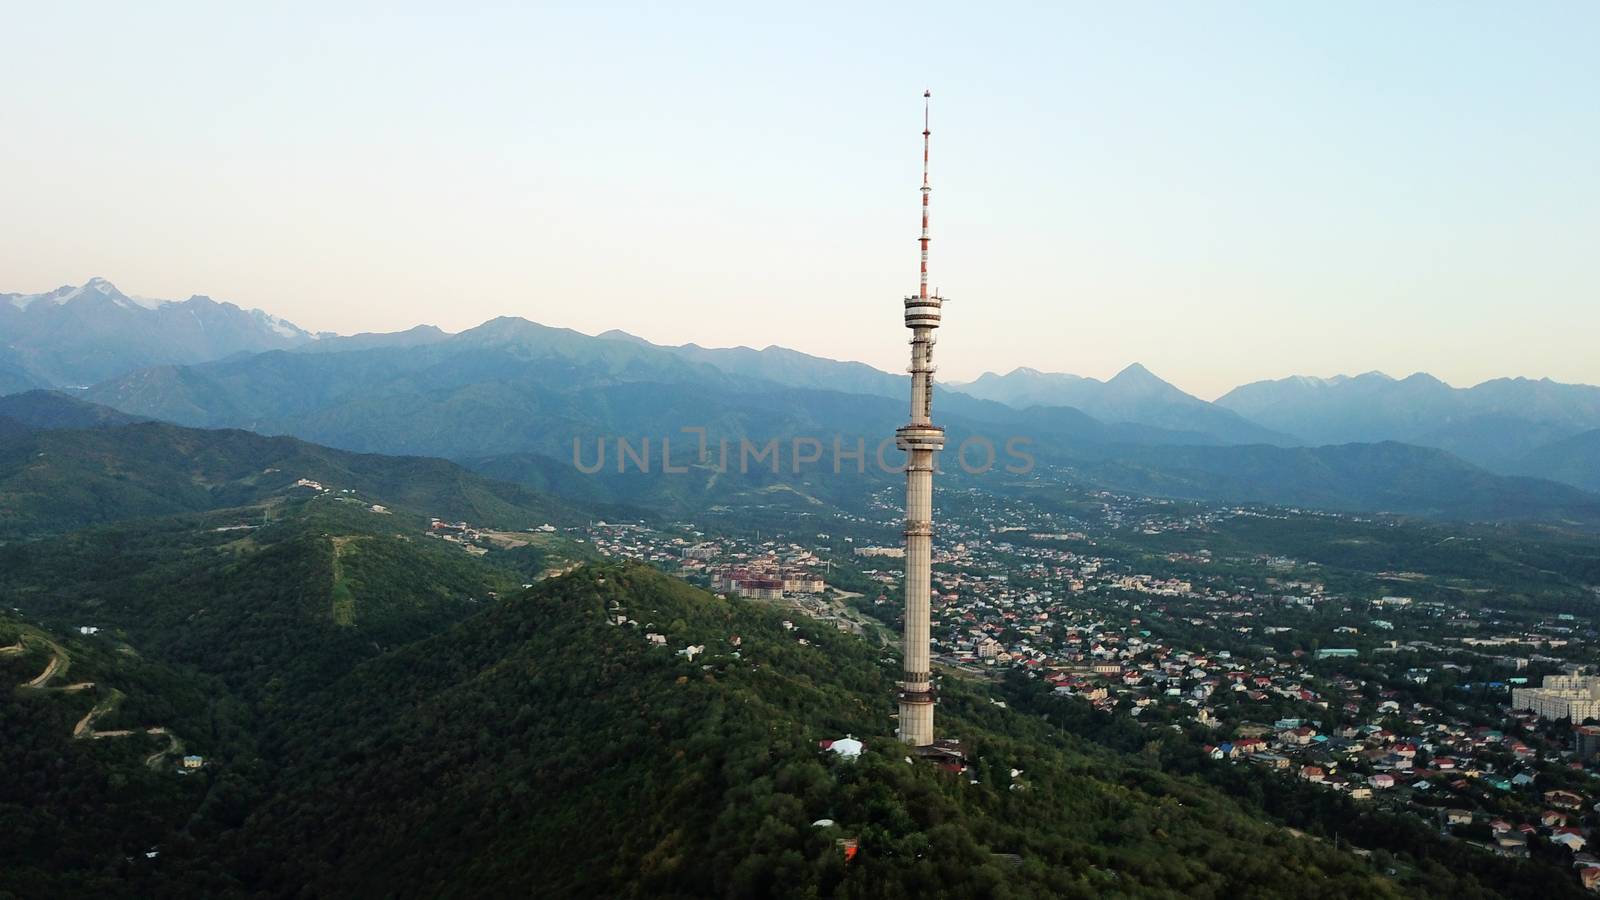 Kok Tobe big TV tower on the green hills of Almaty by Passcal